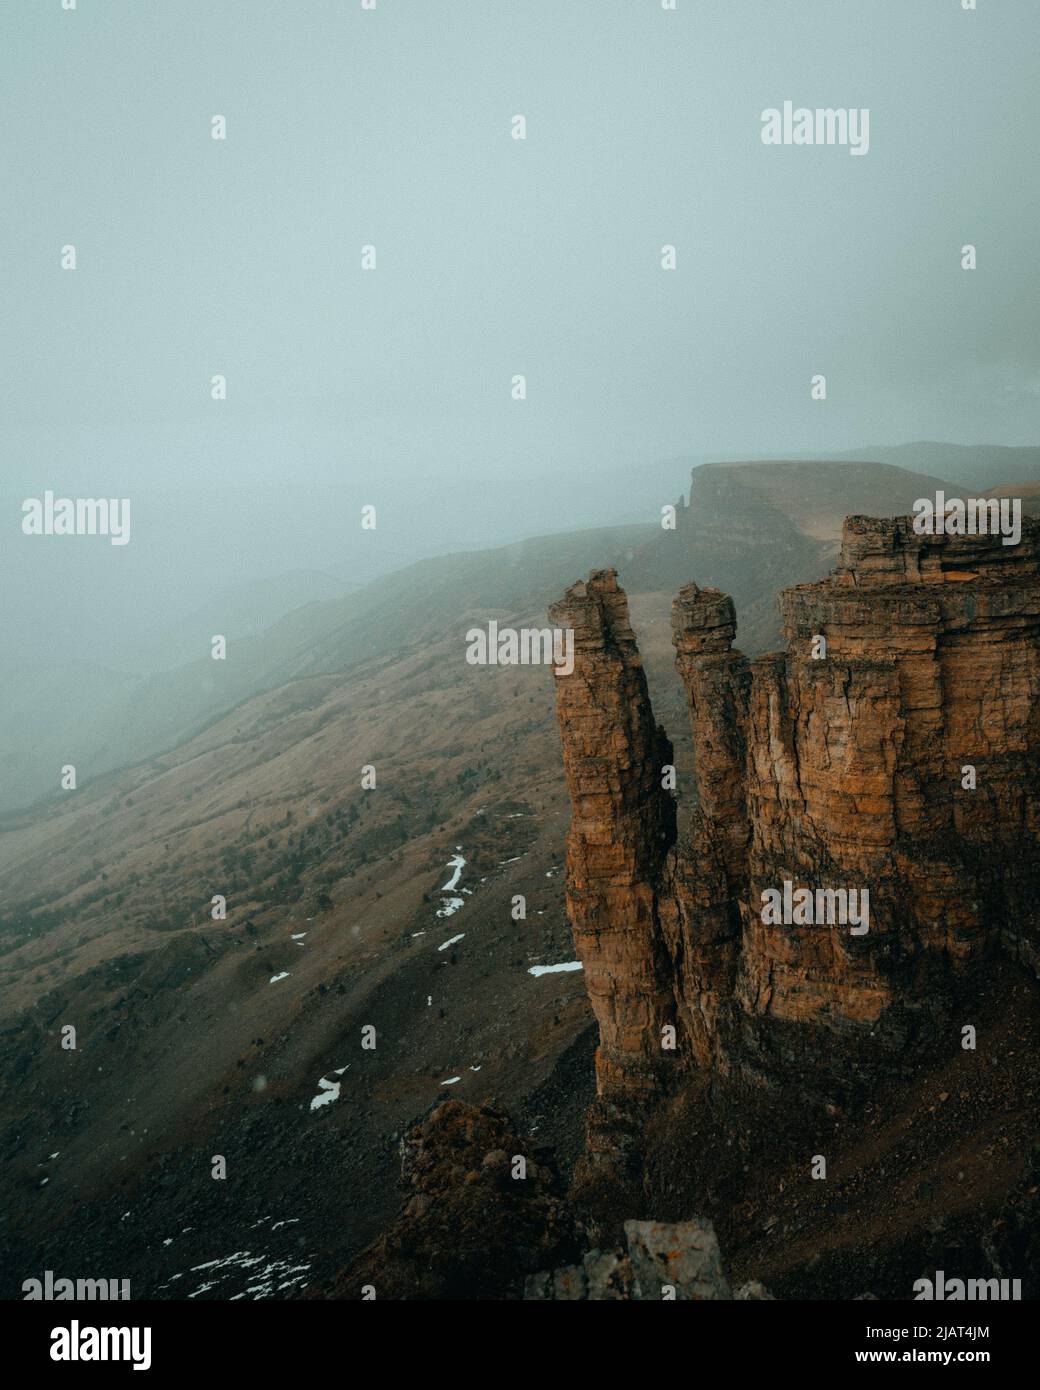 sheer cliffs in a foggy haze from the height of a neighboring peak Stock Photo